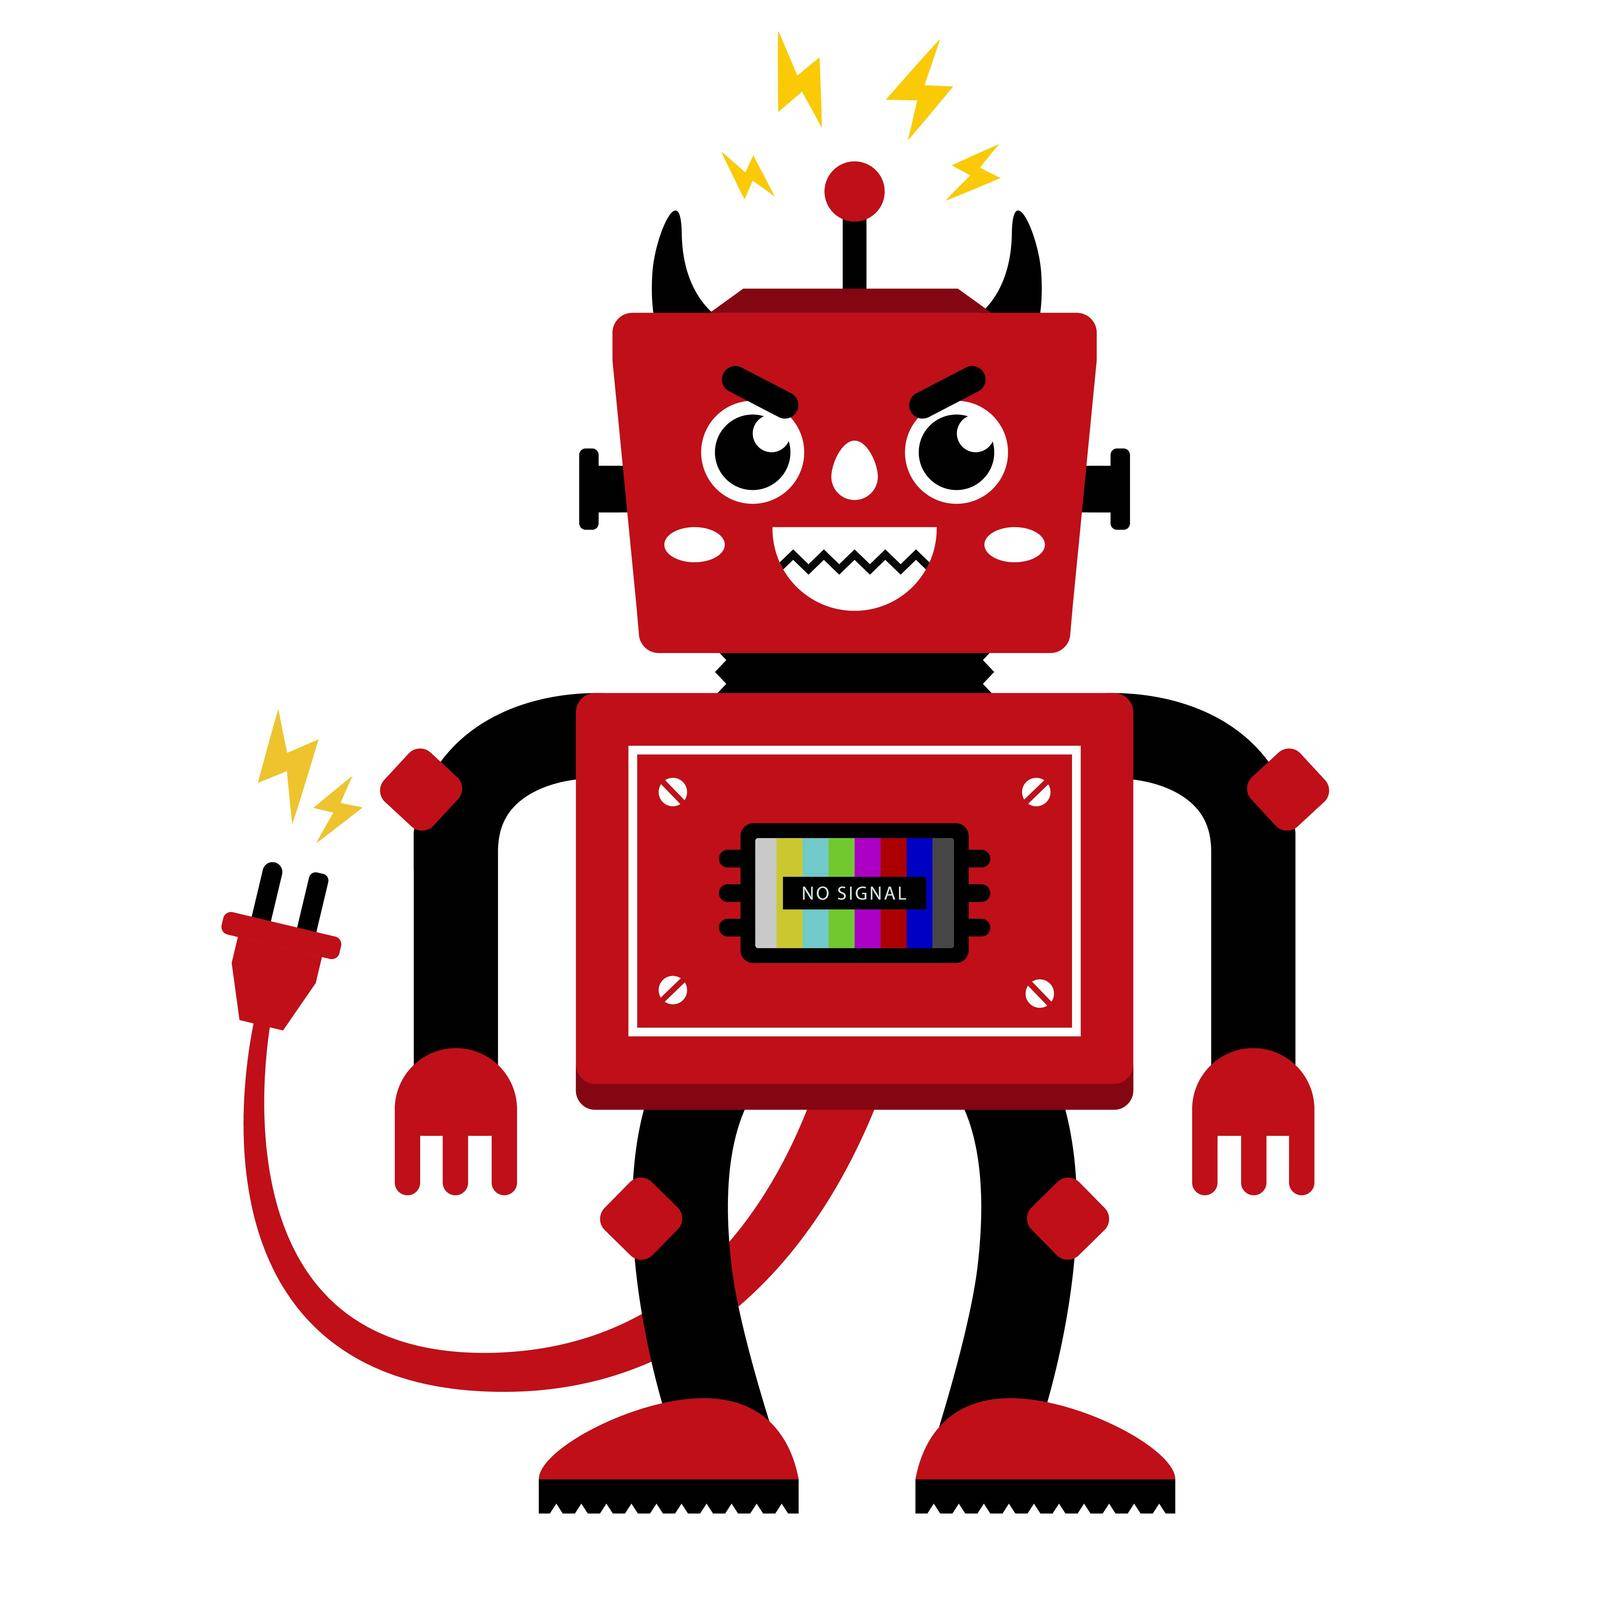 Devil robot with horns and tail. evil cyborg killer. Flat character vector illustration.